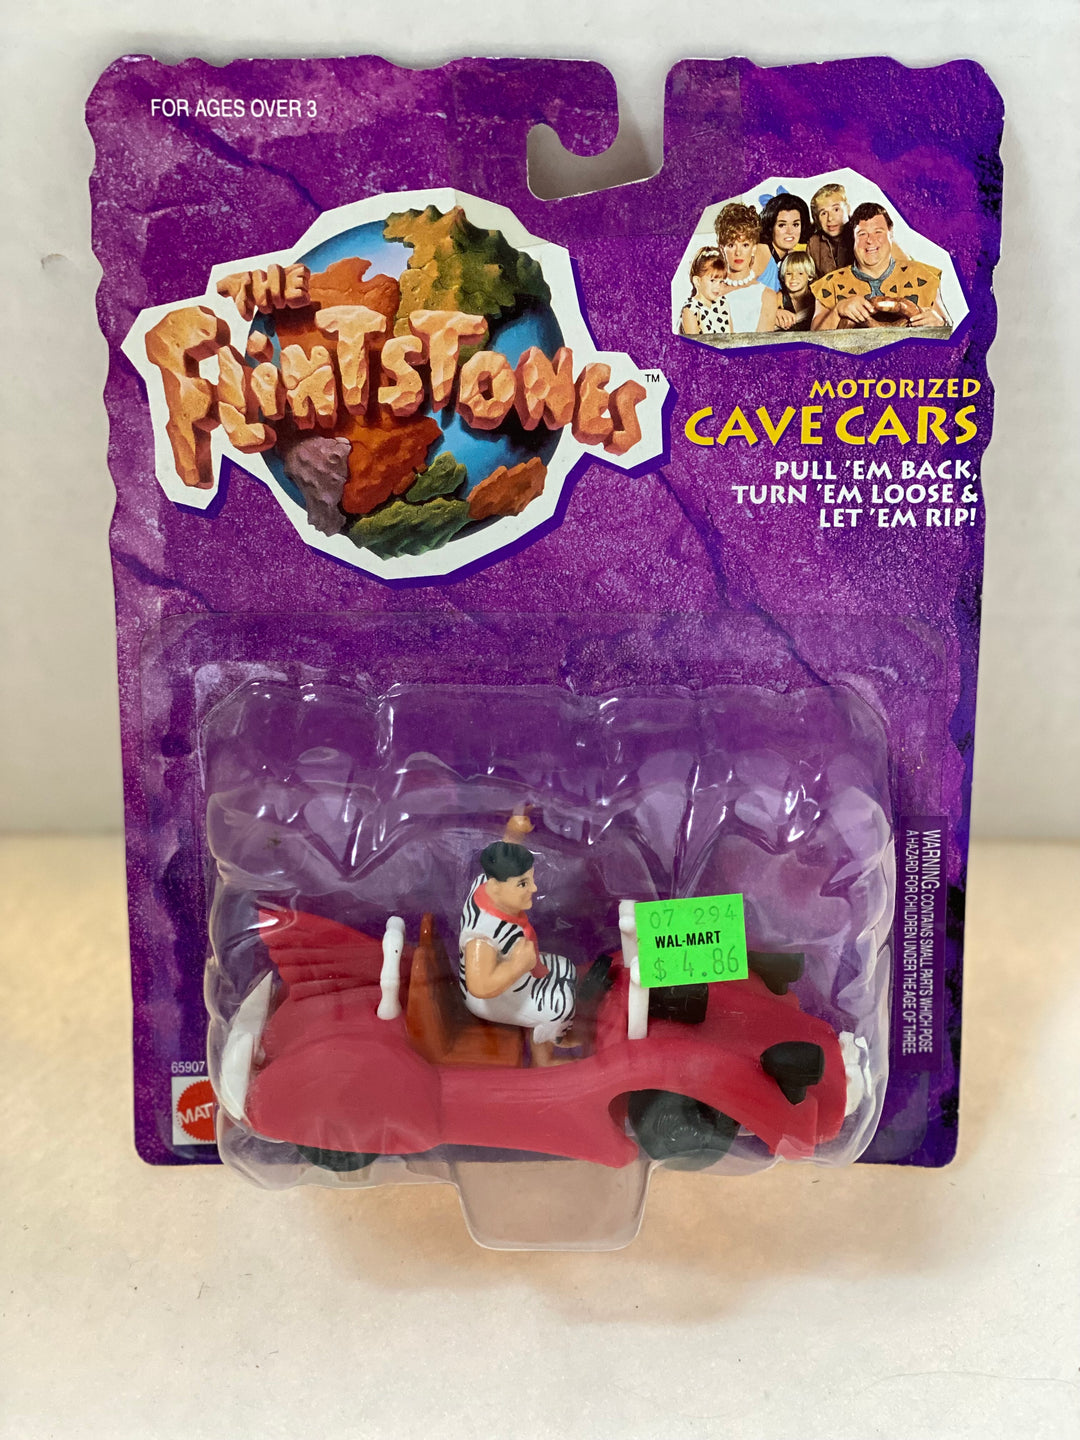 The Flintstones Motorized Cave Cars Le Saber Tooth 5000 Sealed on Card